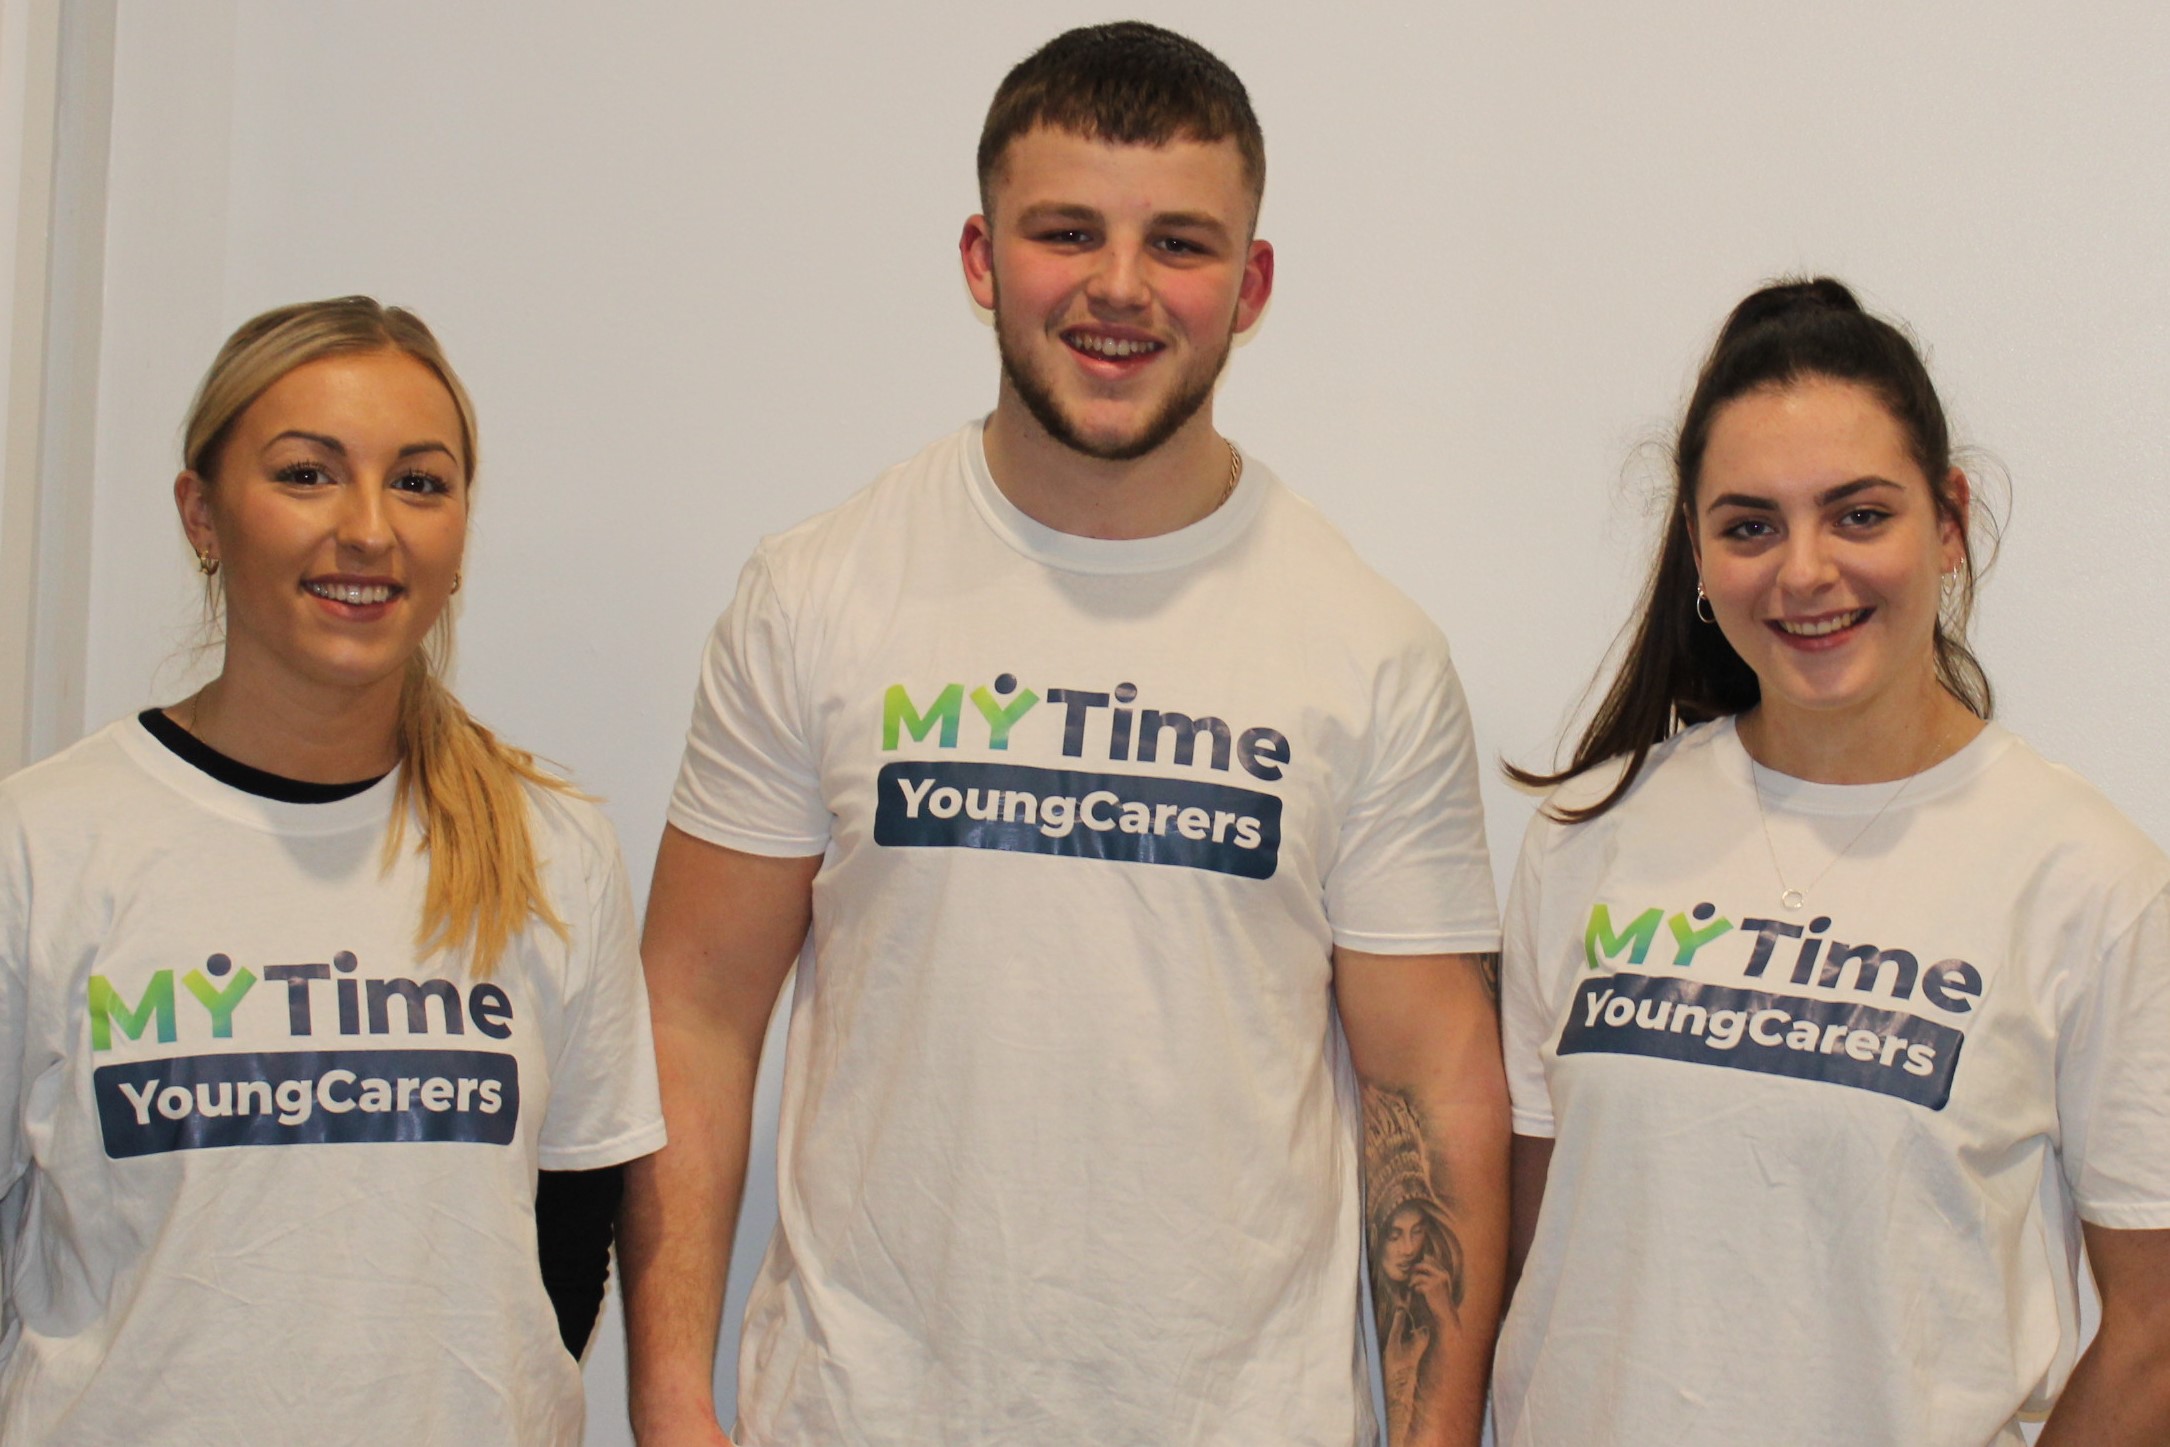 MYTime Young Carers’ Charity wins funding to enable launch of Employability Programme